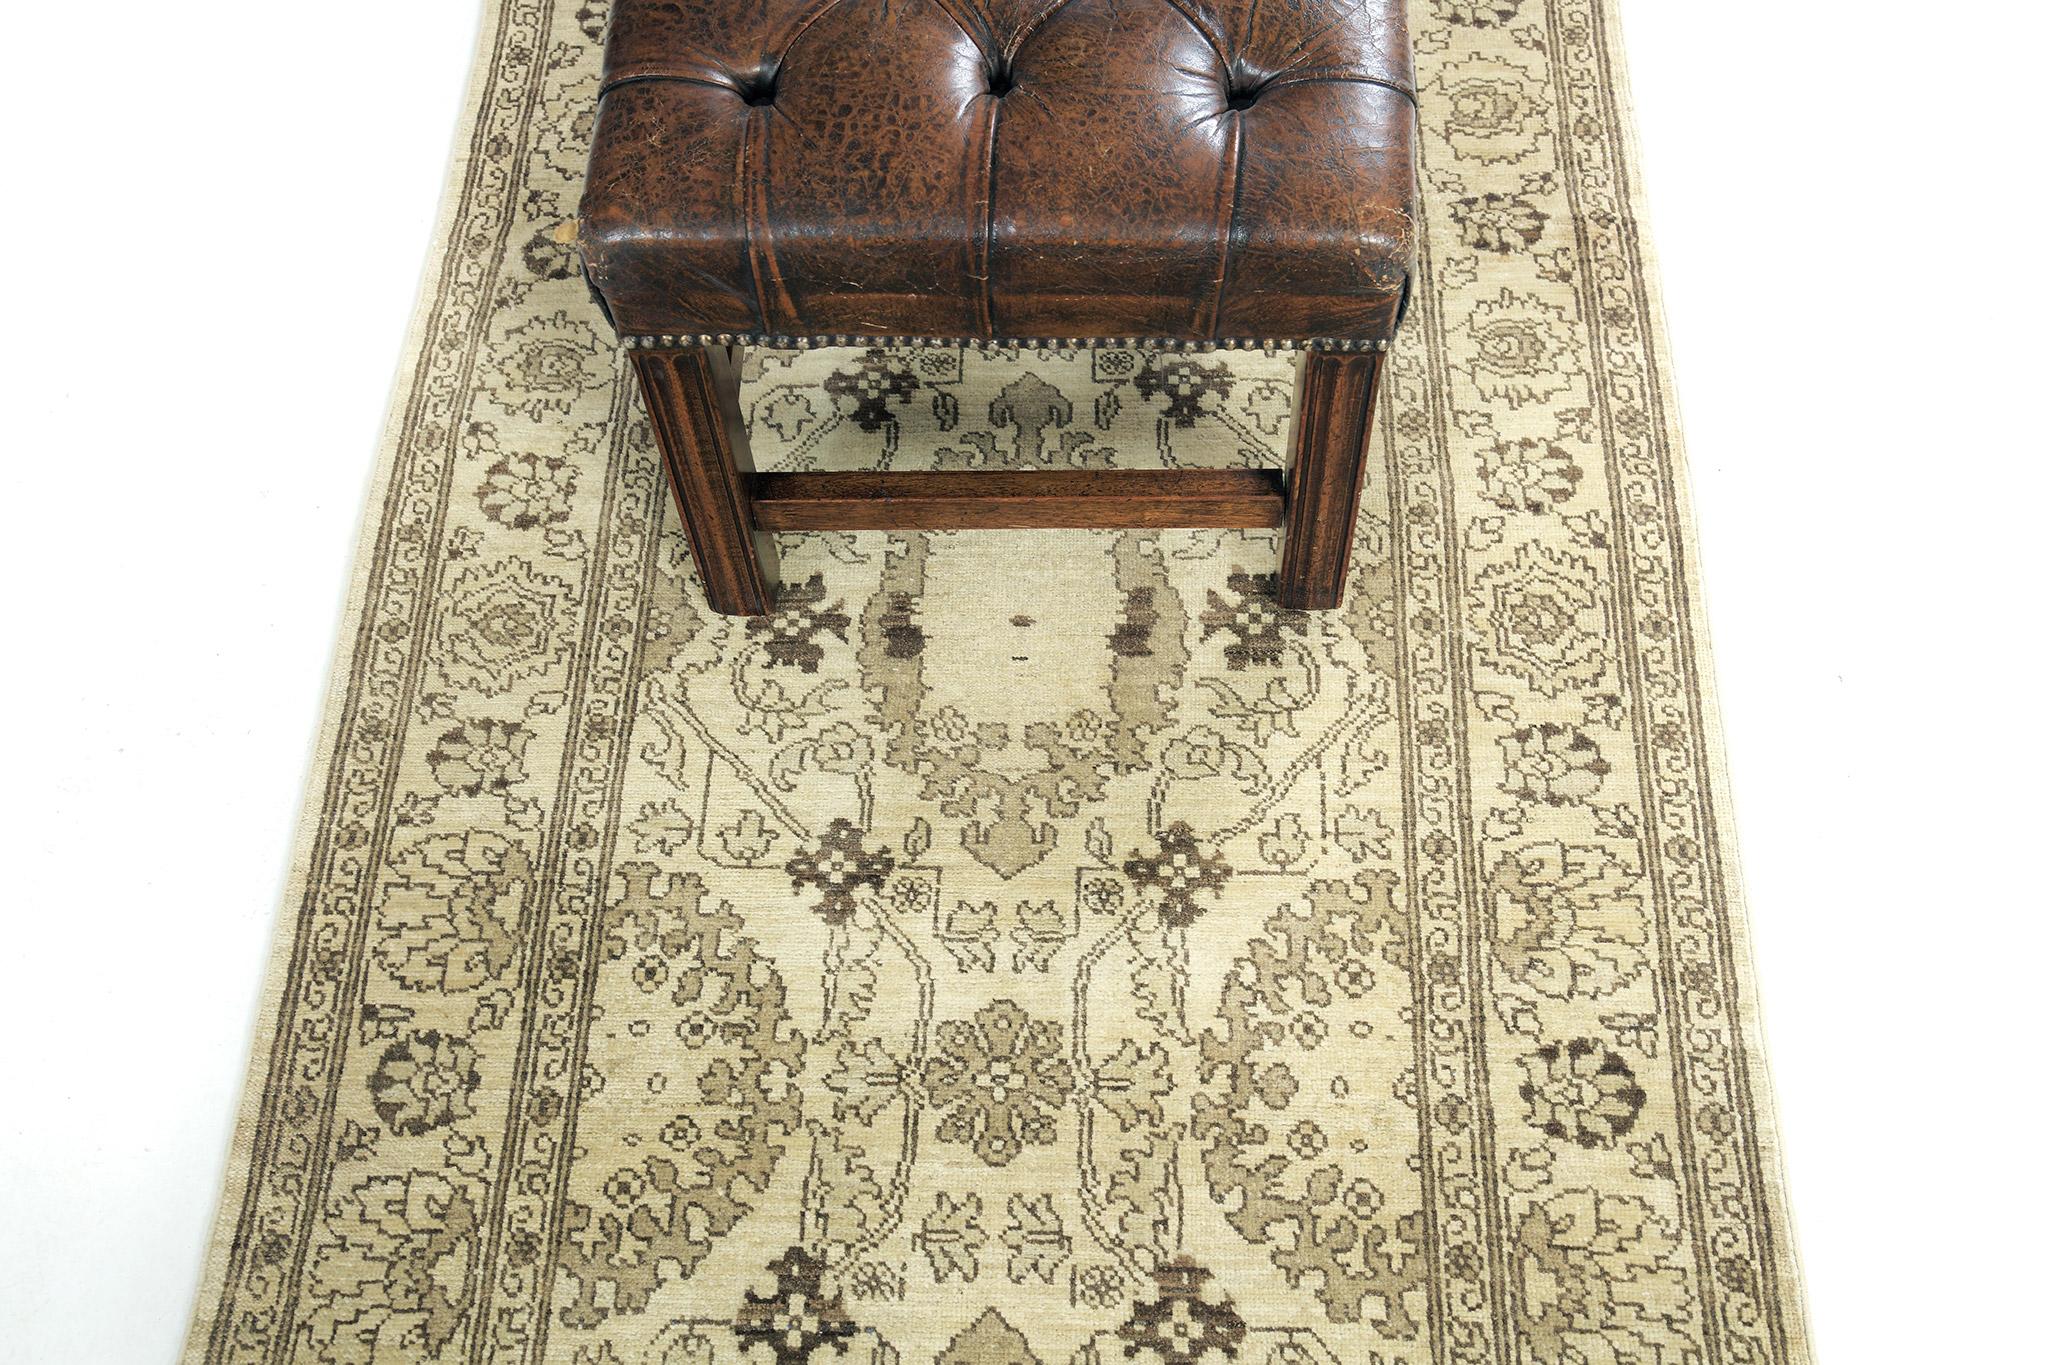 Feel the luxury vibes from our collection that features all the stunning motifs filled with neutral tones of scrolling patterns and brown symbolic elements. This charming Persian Mahal runner provides a cozy and friendly background towards a